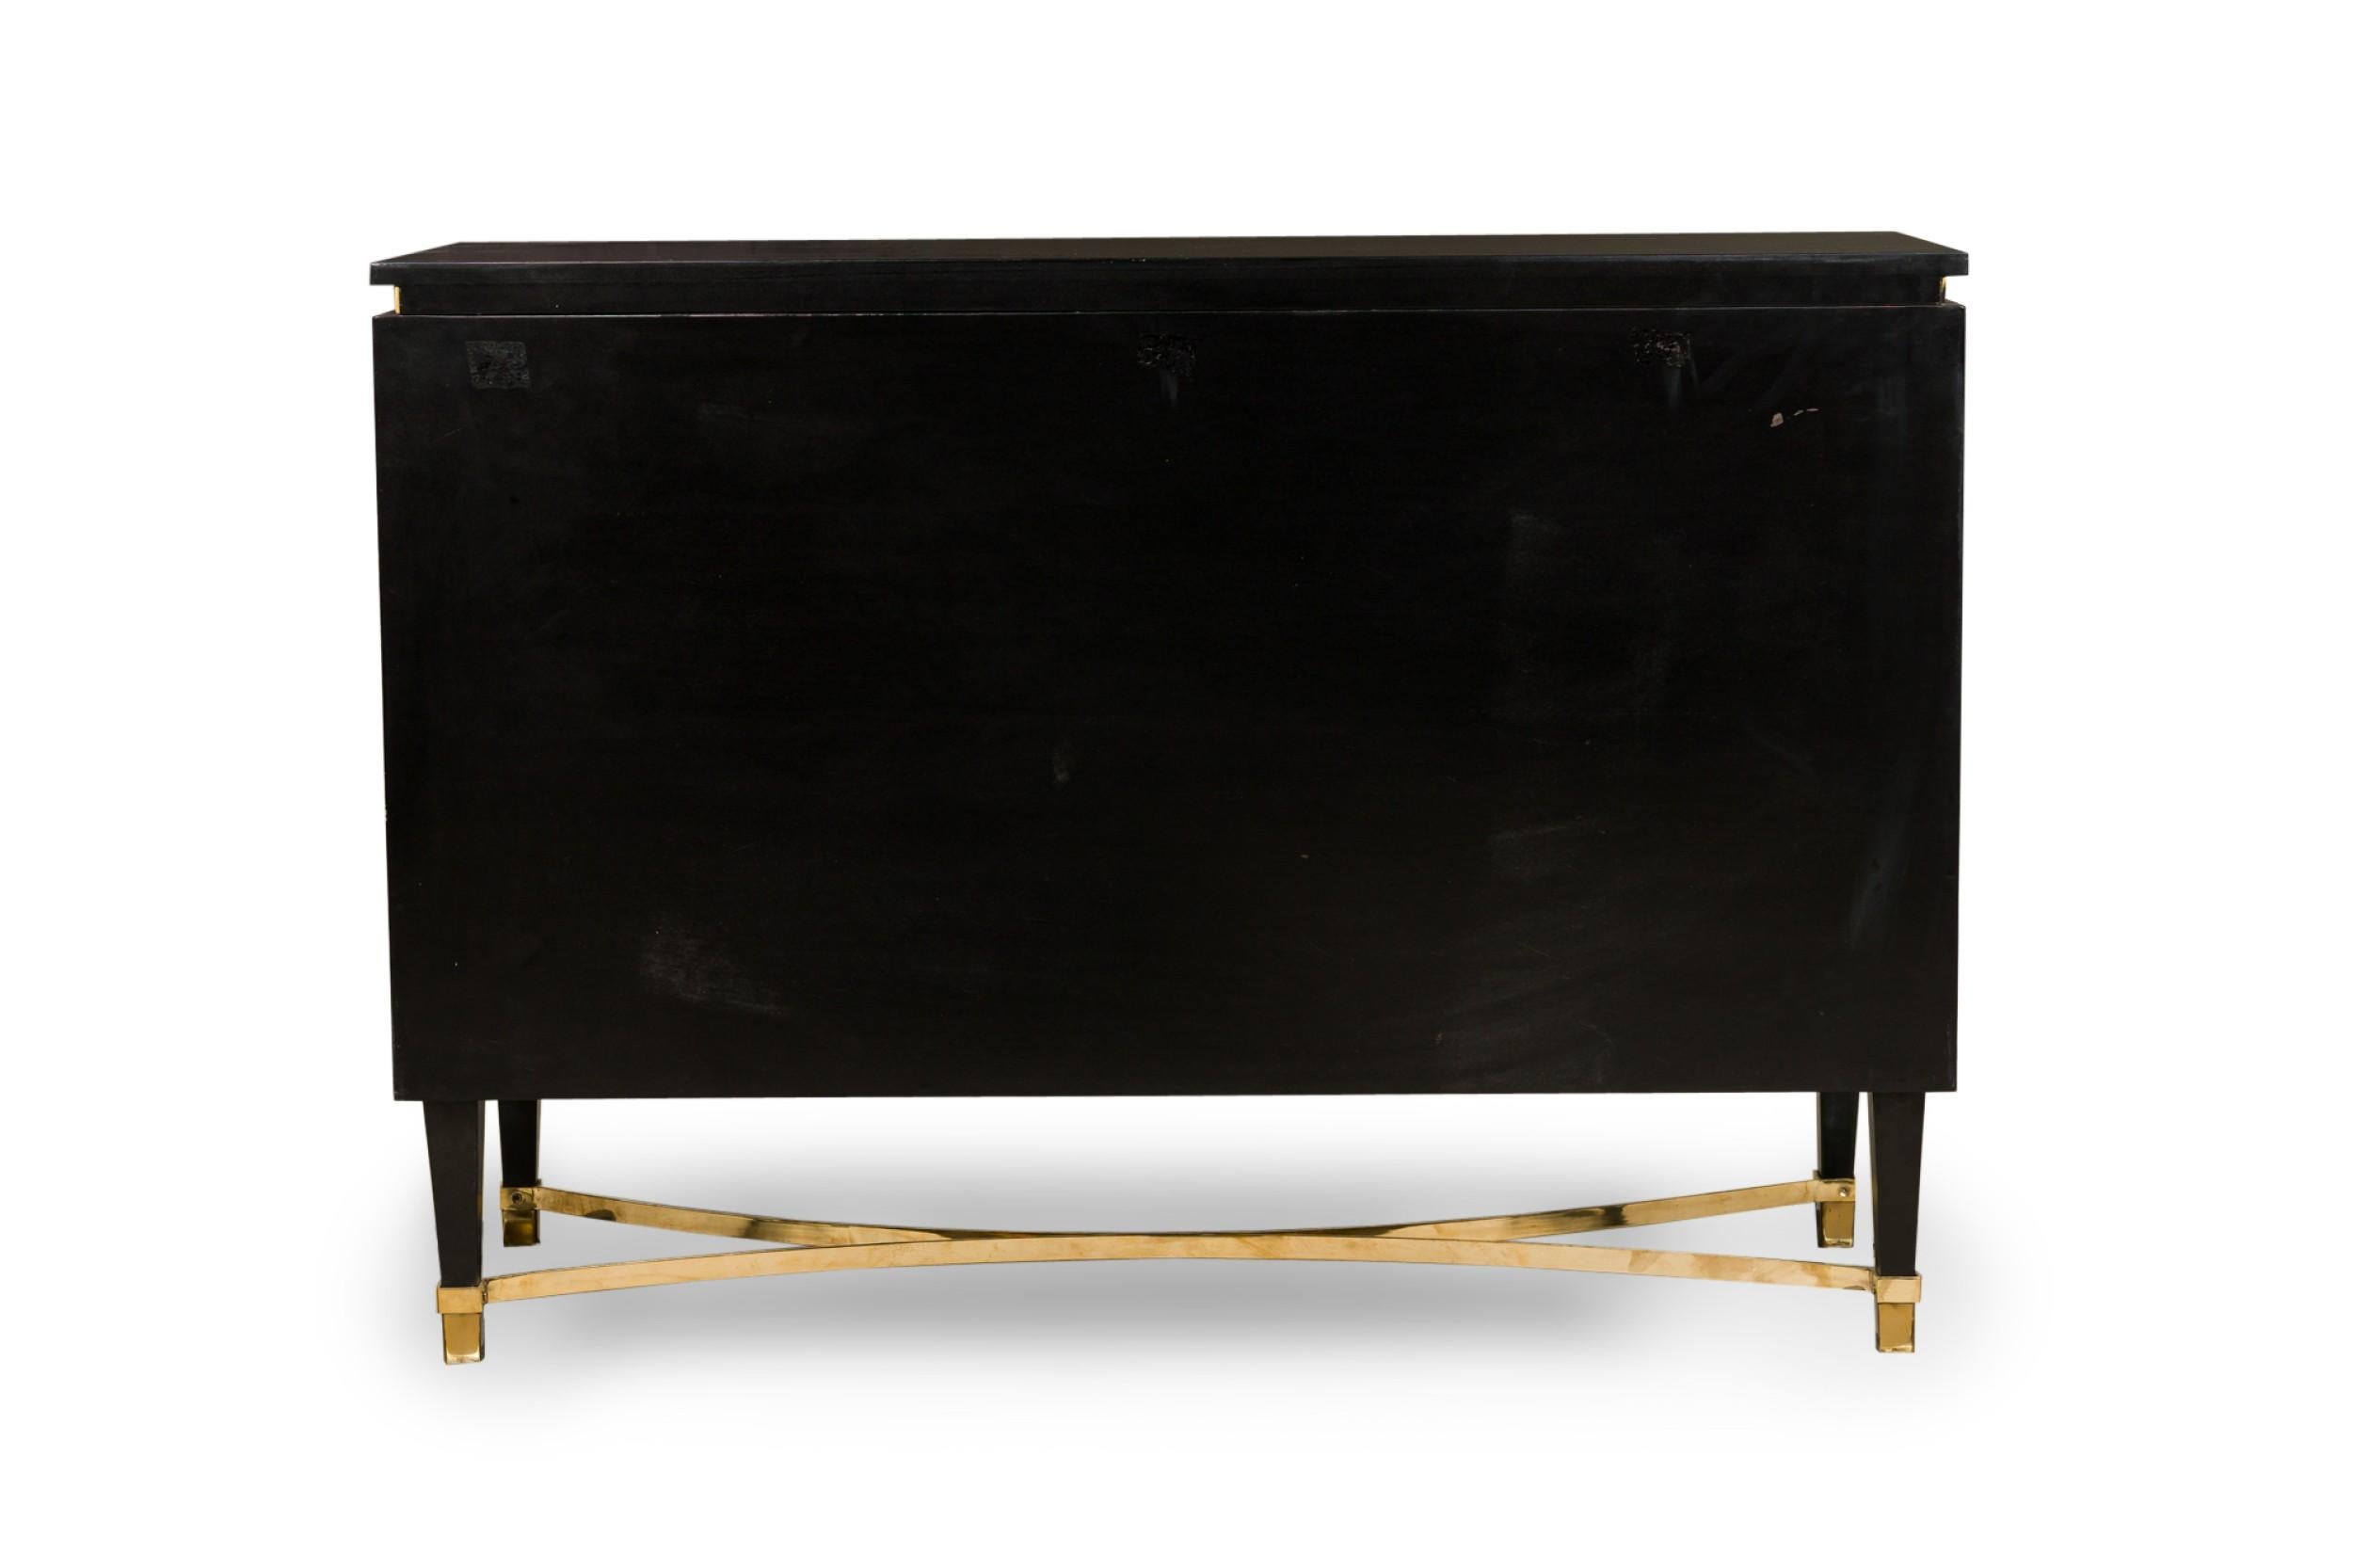 Pair of Continental Ebonized Wood & Bronze Mounted Dressers (Manner of Gucci) For Sale 1